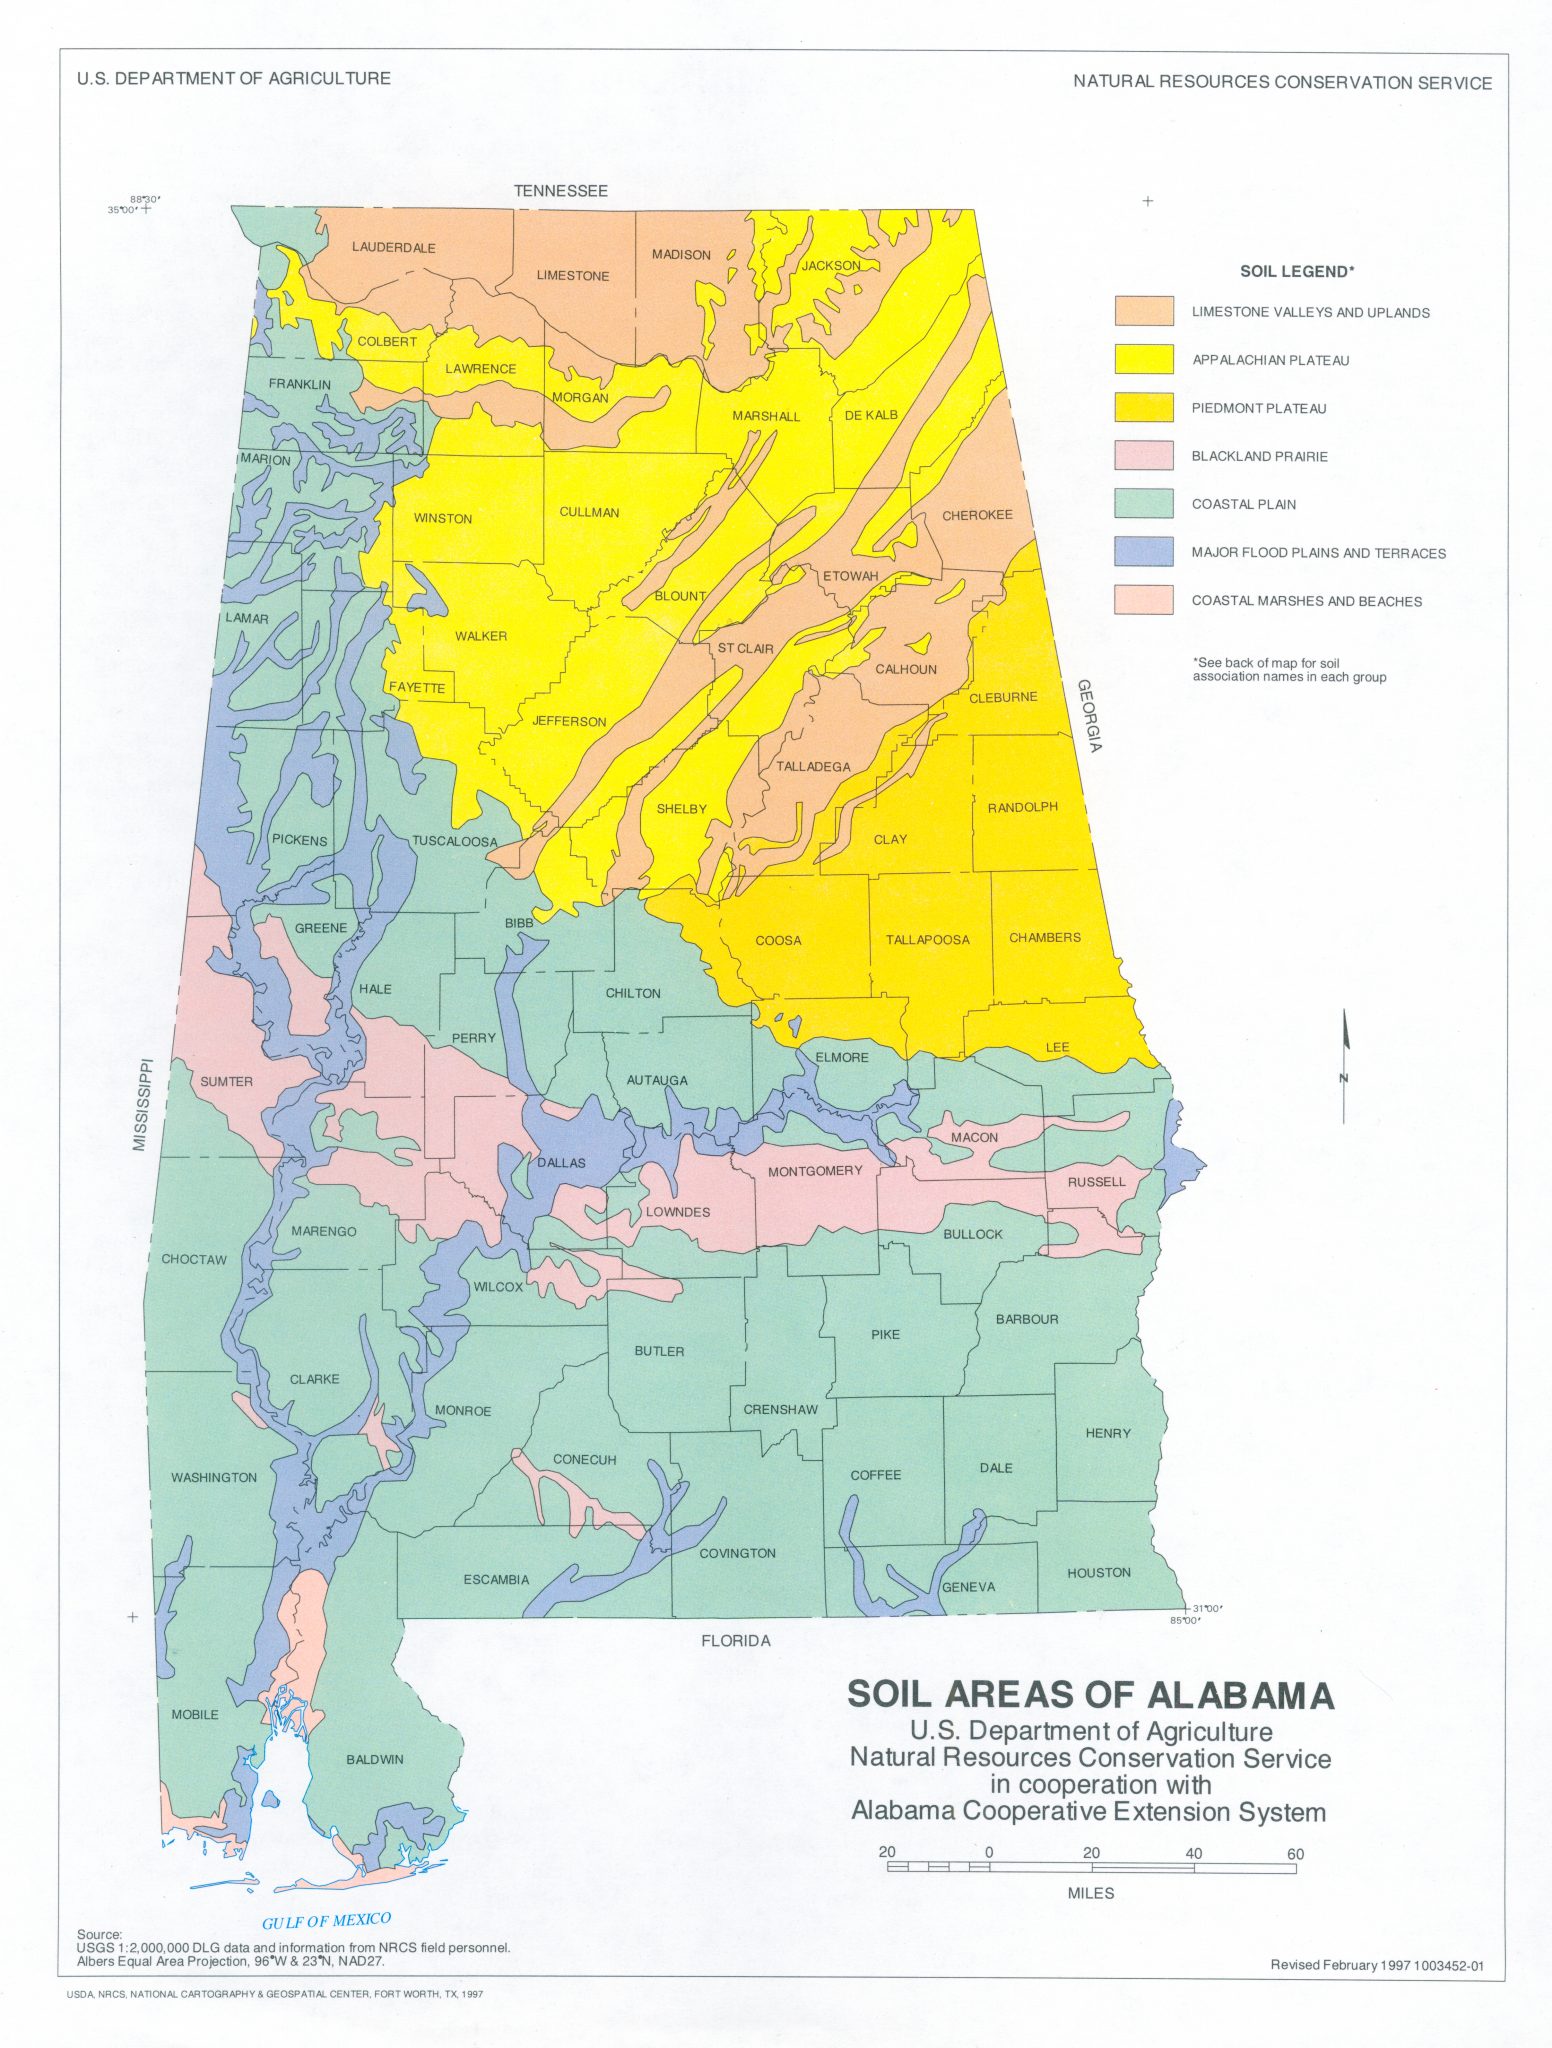 Soil Map of Alabama, showing colored regions depicting changes in soil types.